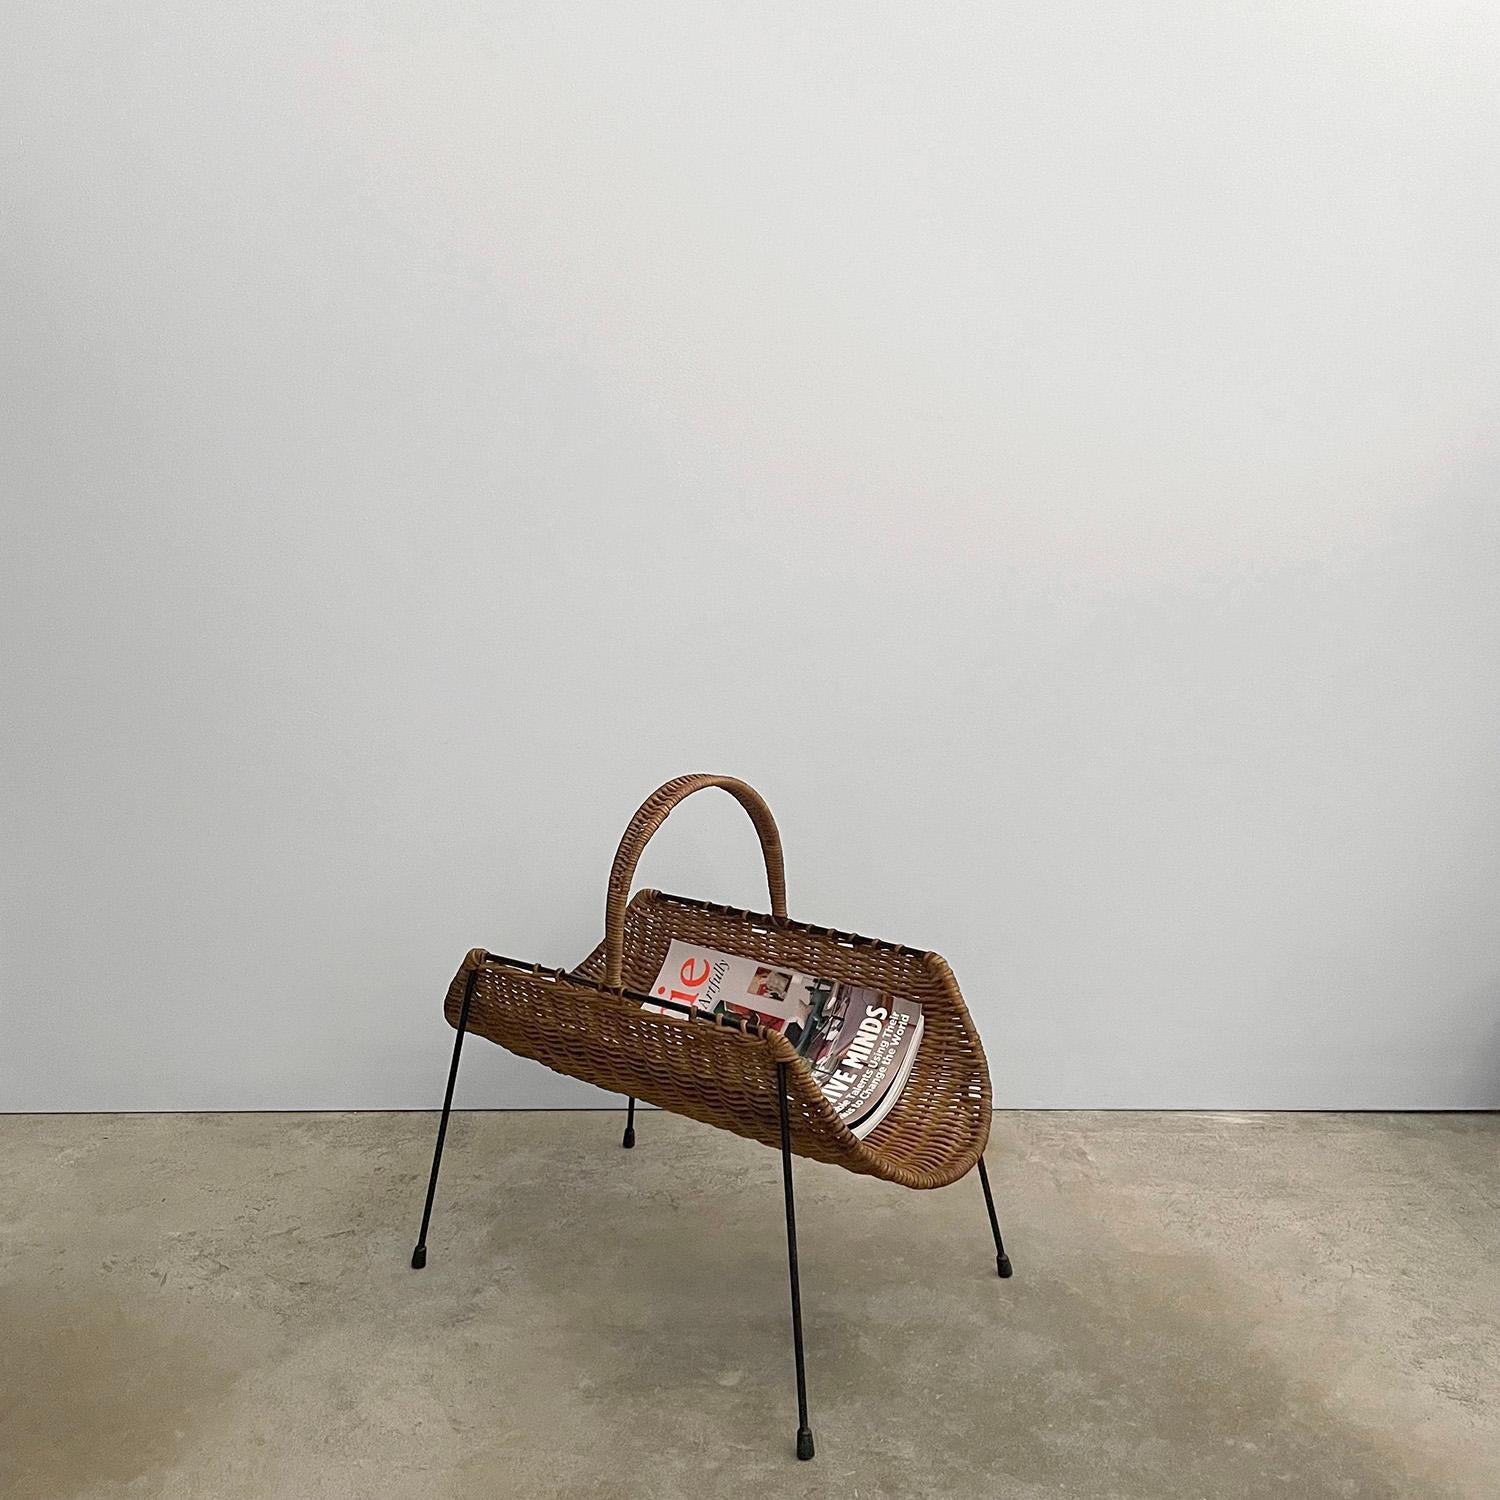 Campo Graffi wicker and iron magazine rack
Italy, 1950s 
Intricately woven wicker encompasses sculpted iron frame 
Handwoven wrapped arch handle 
Natural color variations 
Patina from age and use 
Perfect for magazine and book storage as well as a